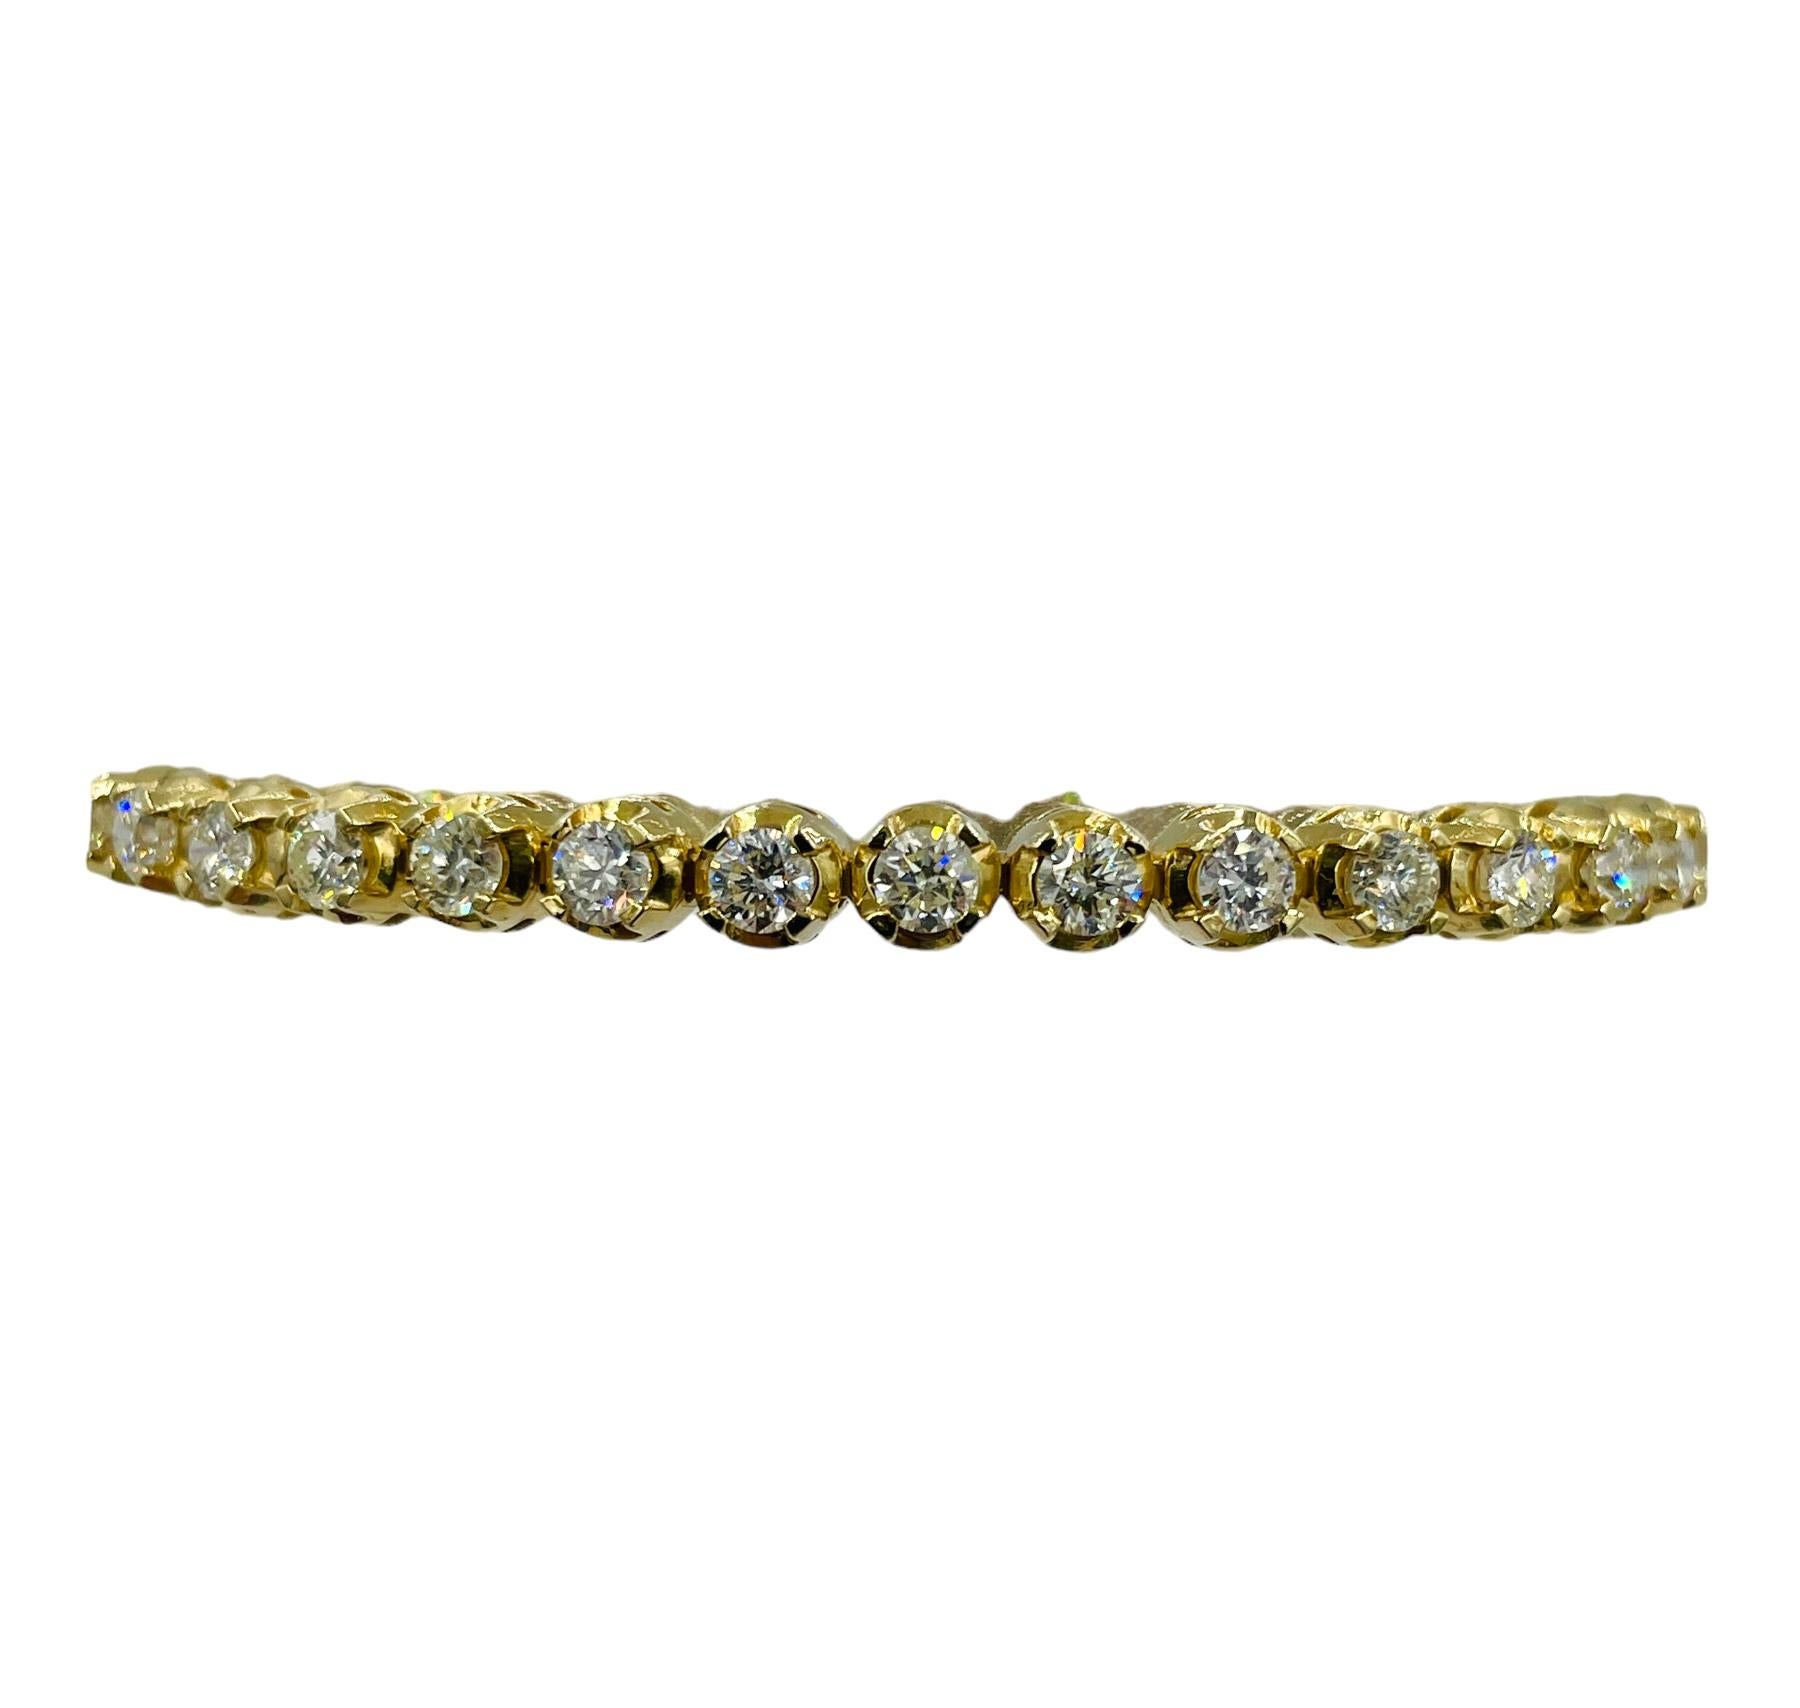 Diamond Yellow Gold Tennis Bracelet 6 1/2 Inches Long In Good Condition For Sale In Los Angeles, CA